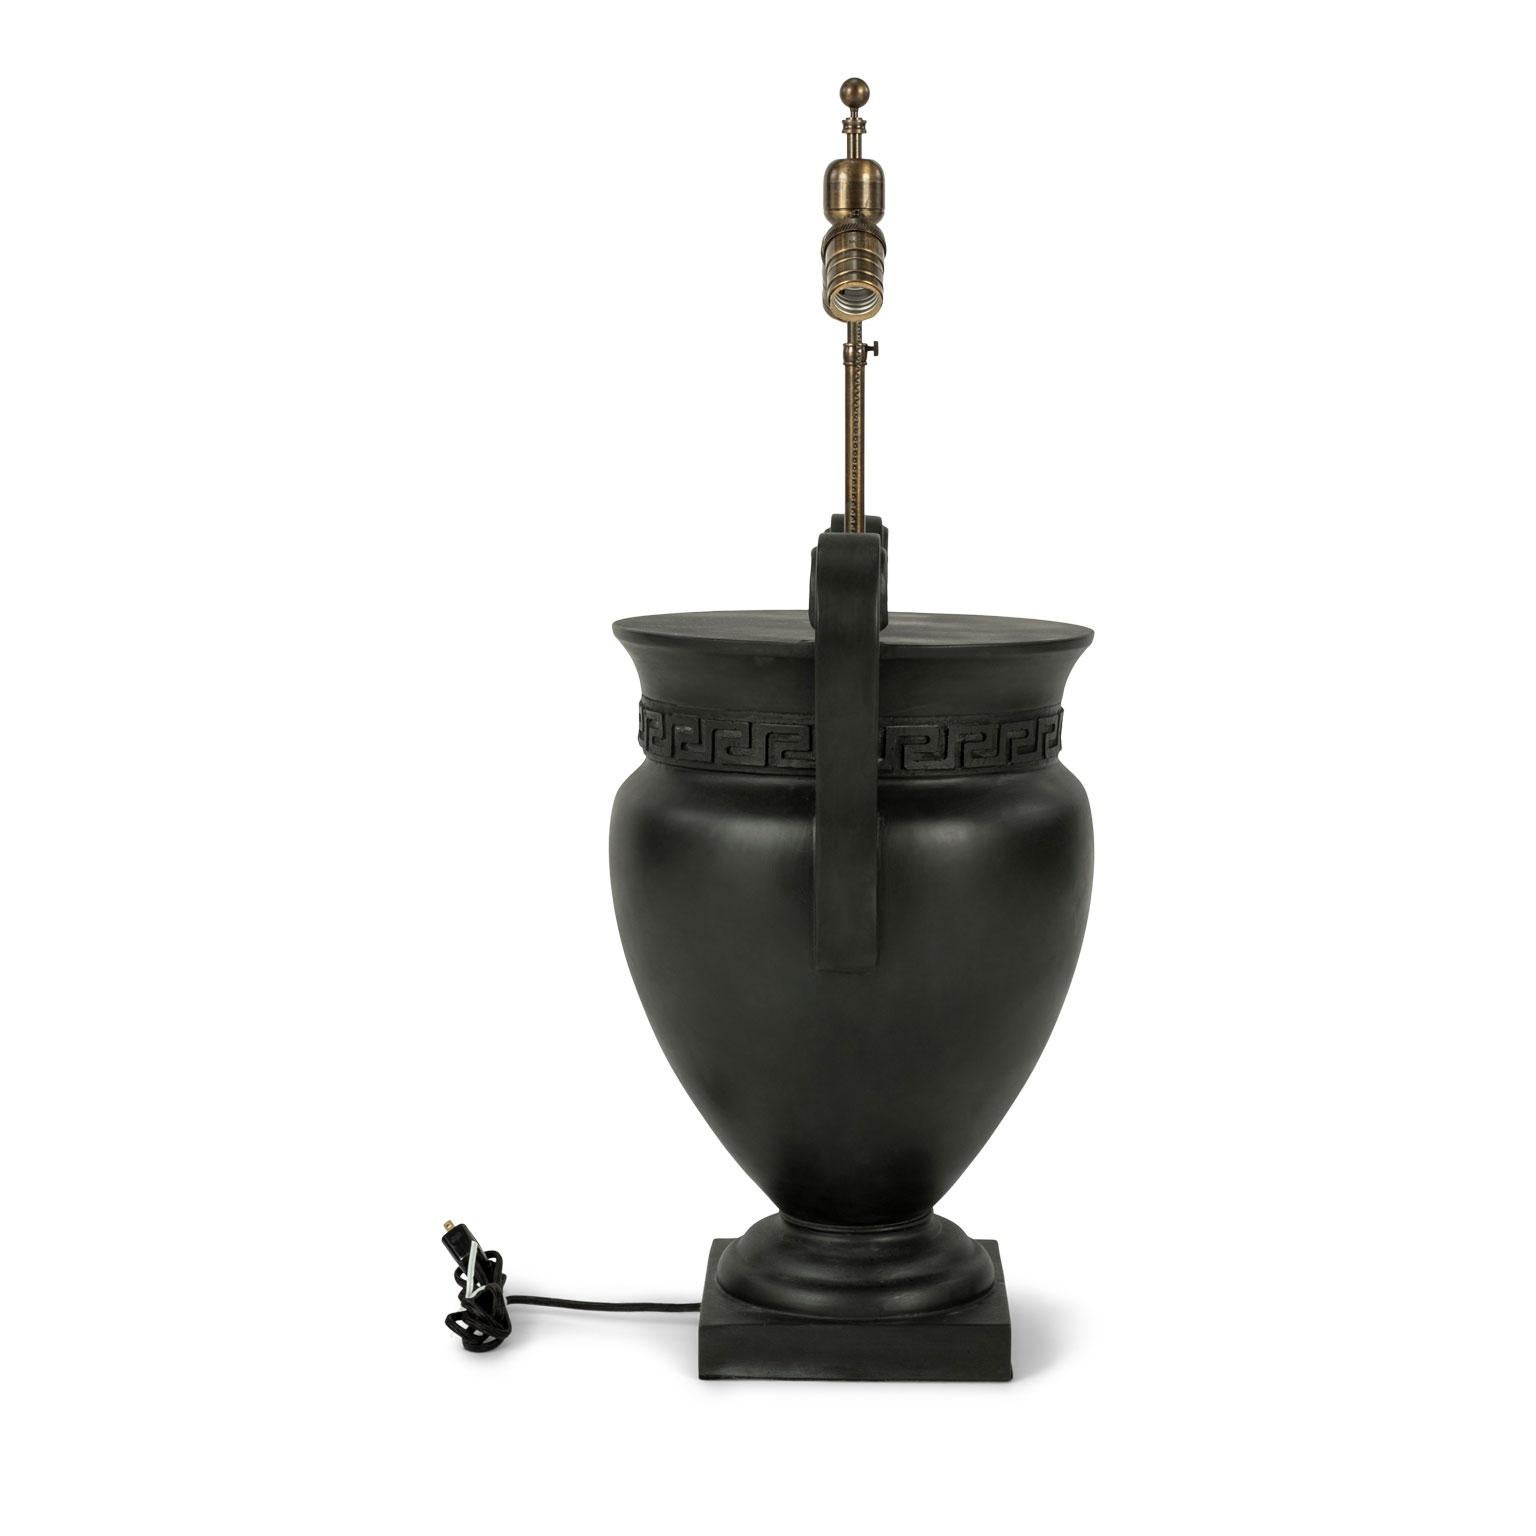 Large black plaster urn-shape lamp, decorated in Greek key motif, by Liz Marsh. Newly wired for use within the USA using UL listed parts. Features two down-turned medium size sockets. Listed height measured to top of central stem (sold without